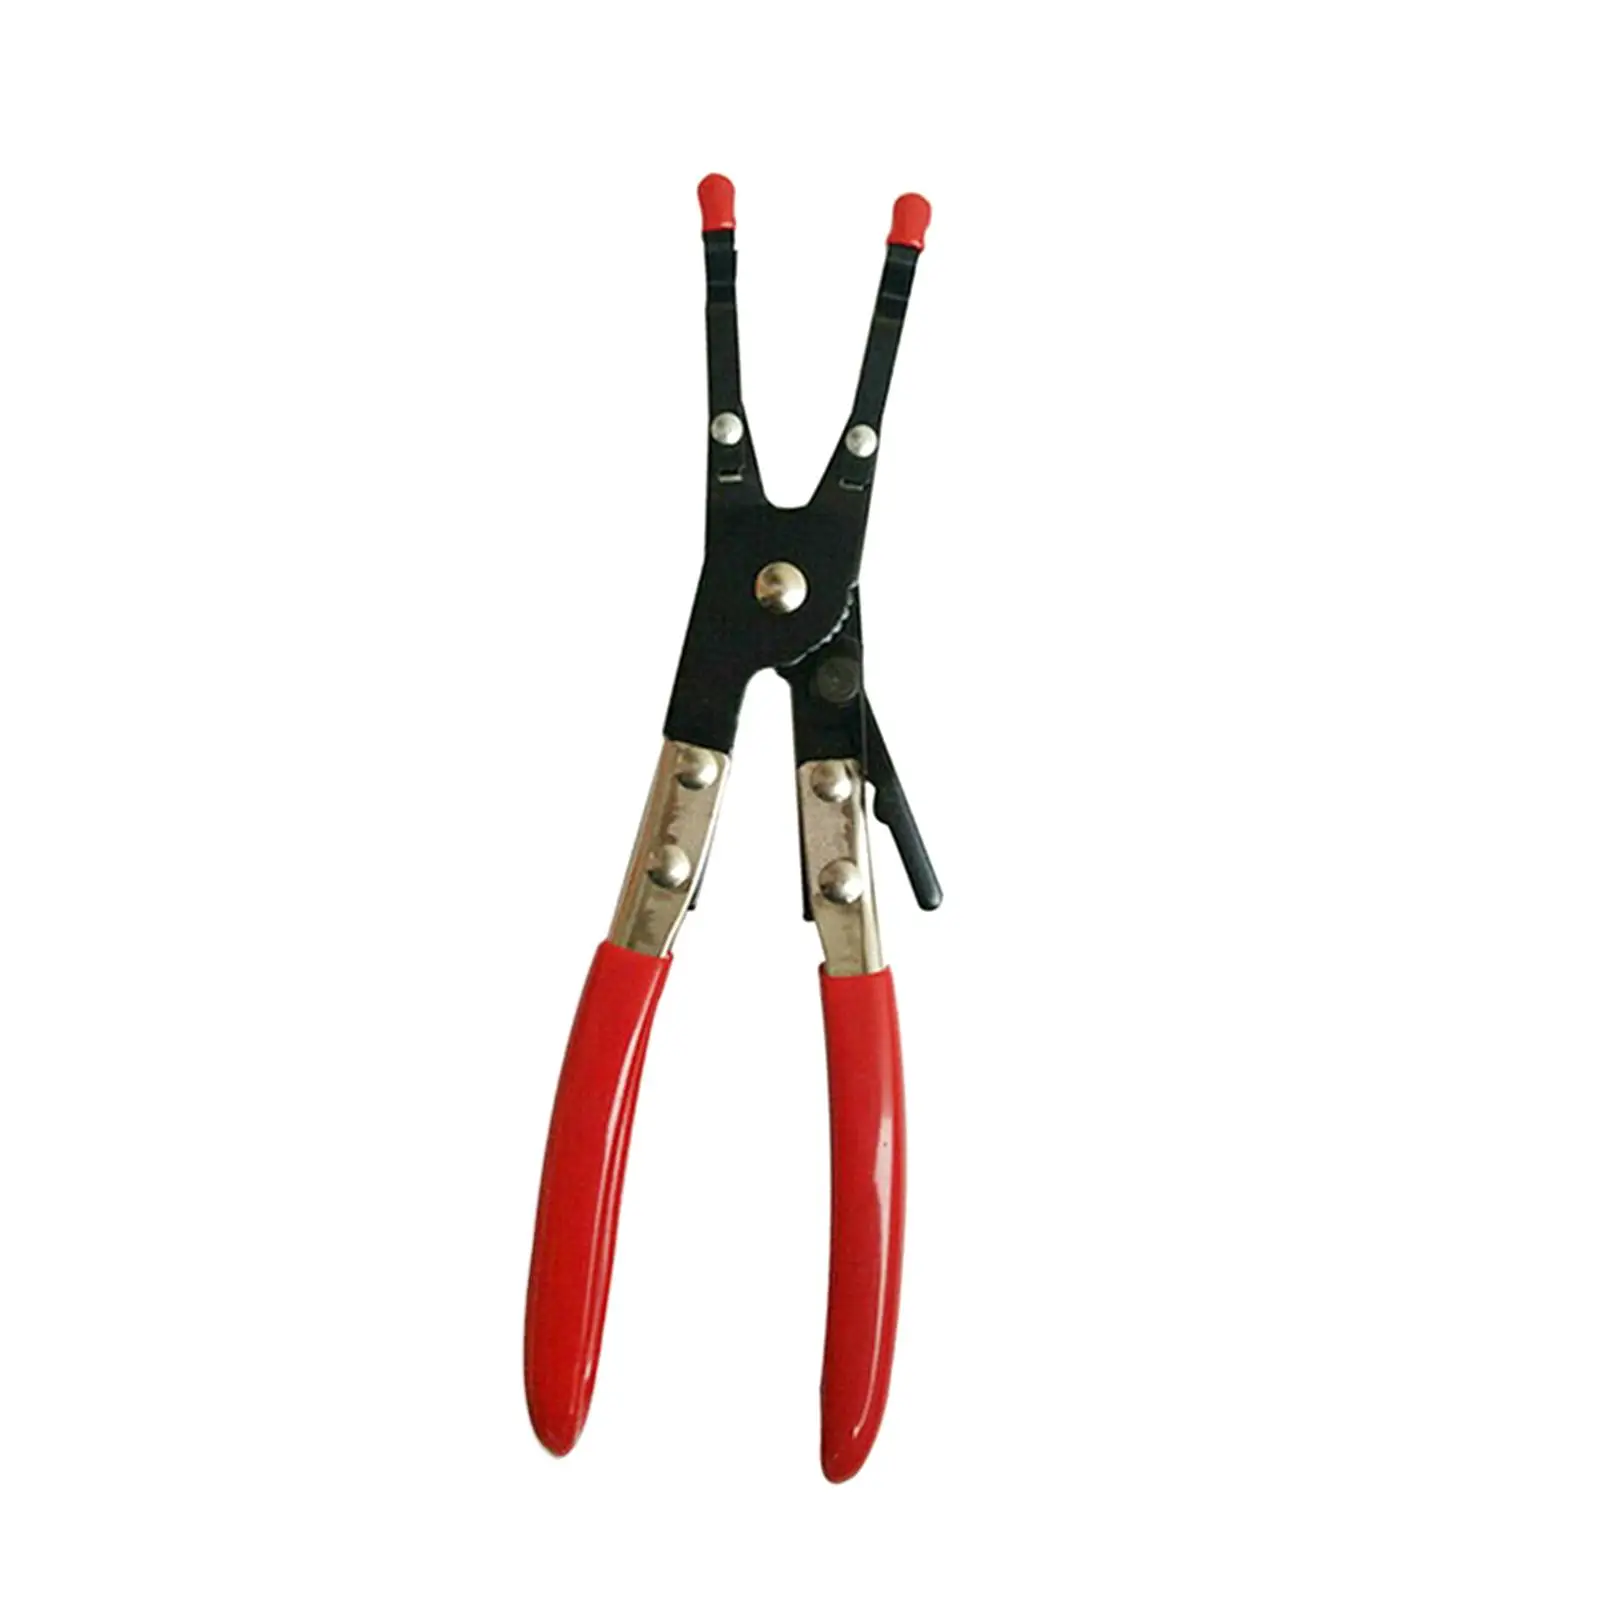 Vehicle Soldering Plier Multifunctional Strong Stability Pick up Aid Tool Easy to Use Repair Kit Welding Pliers for Garage